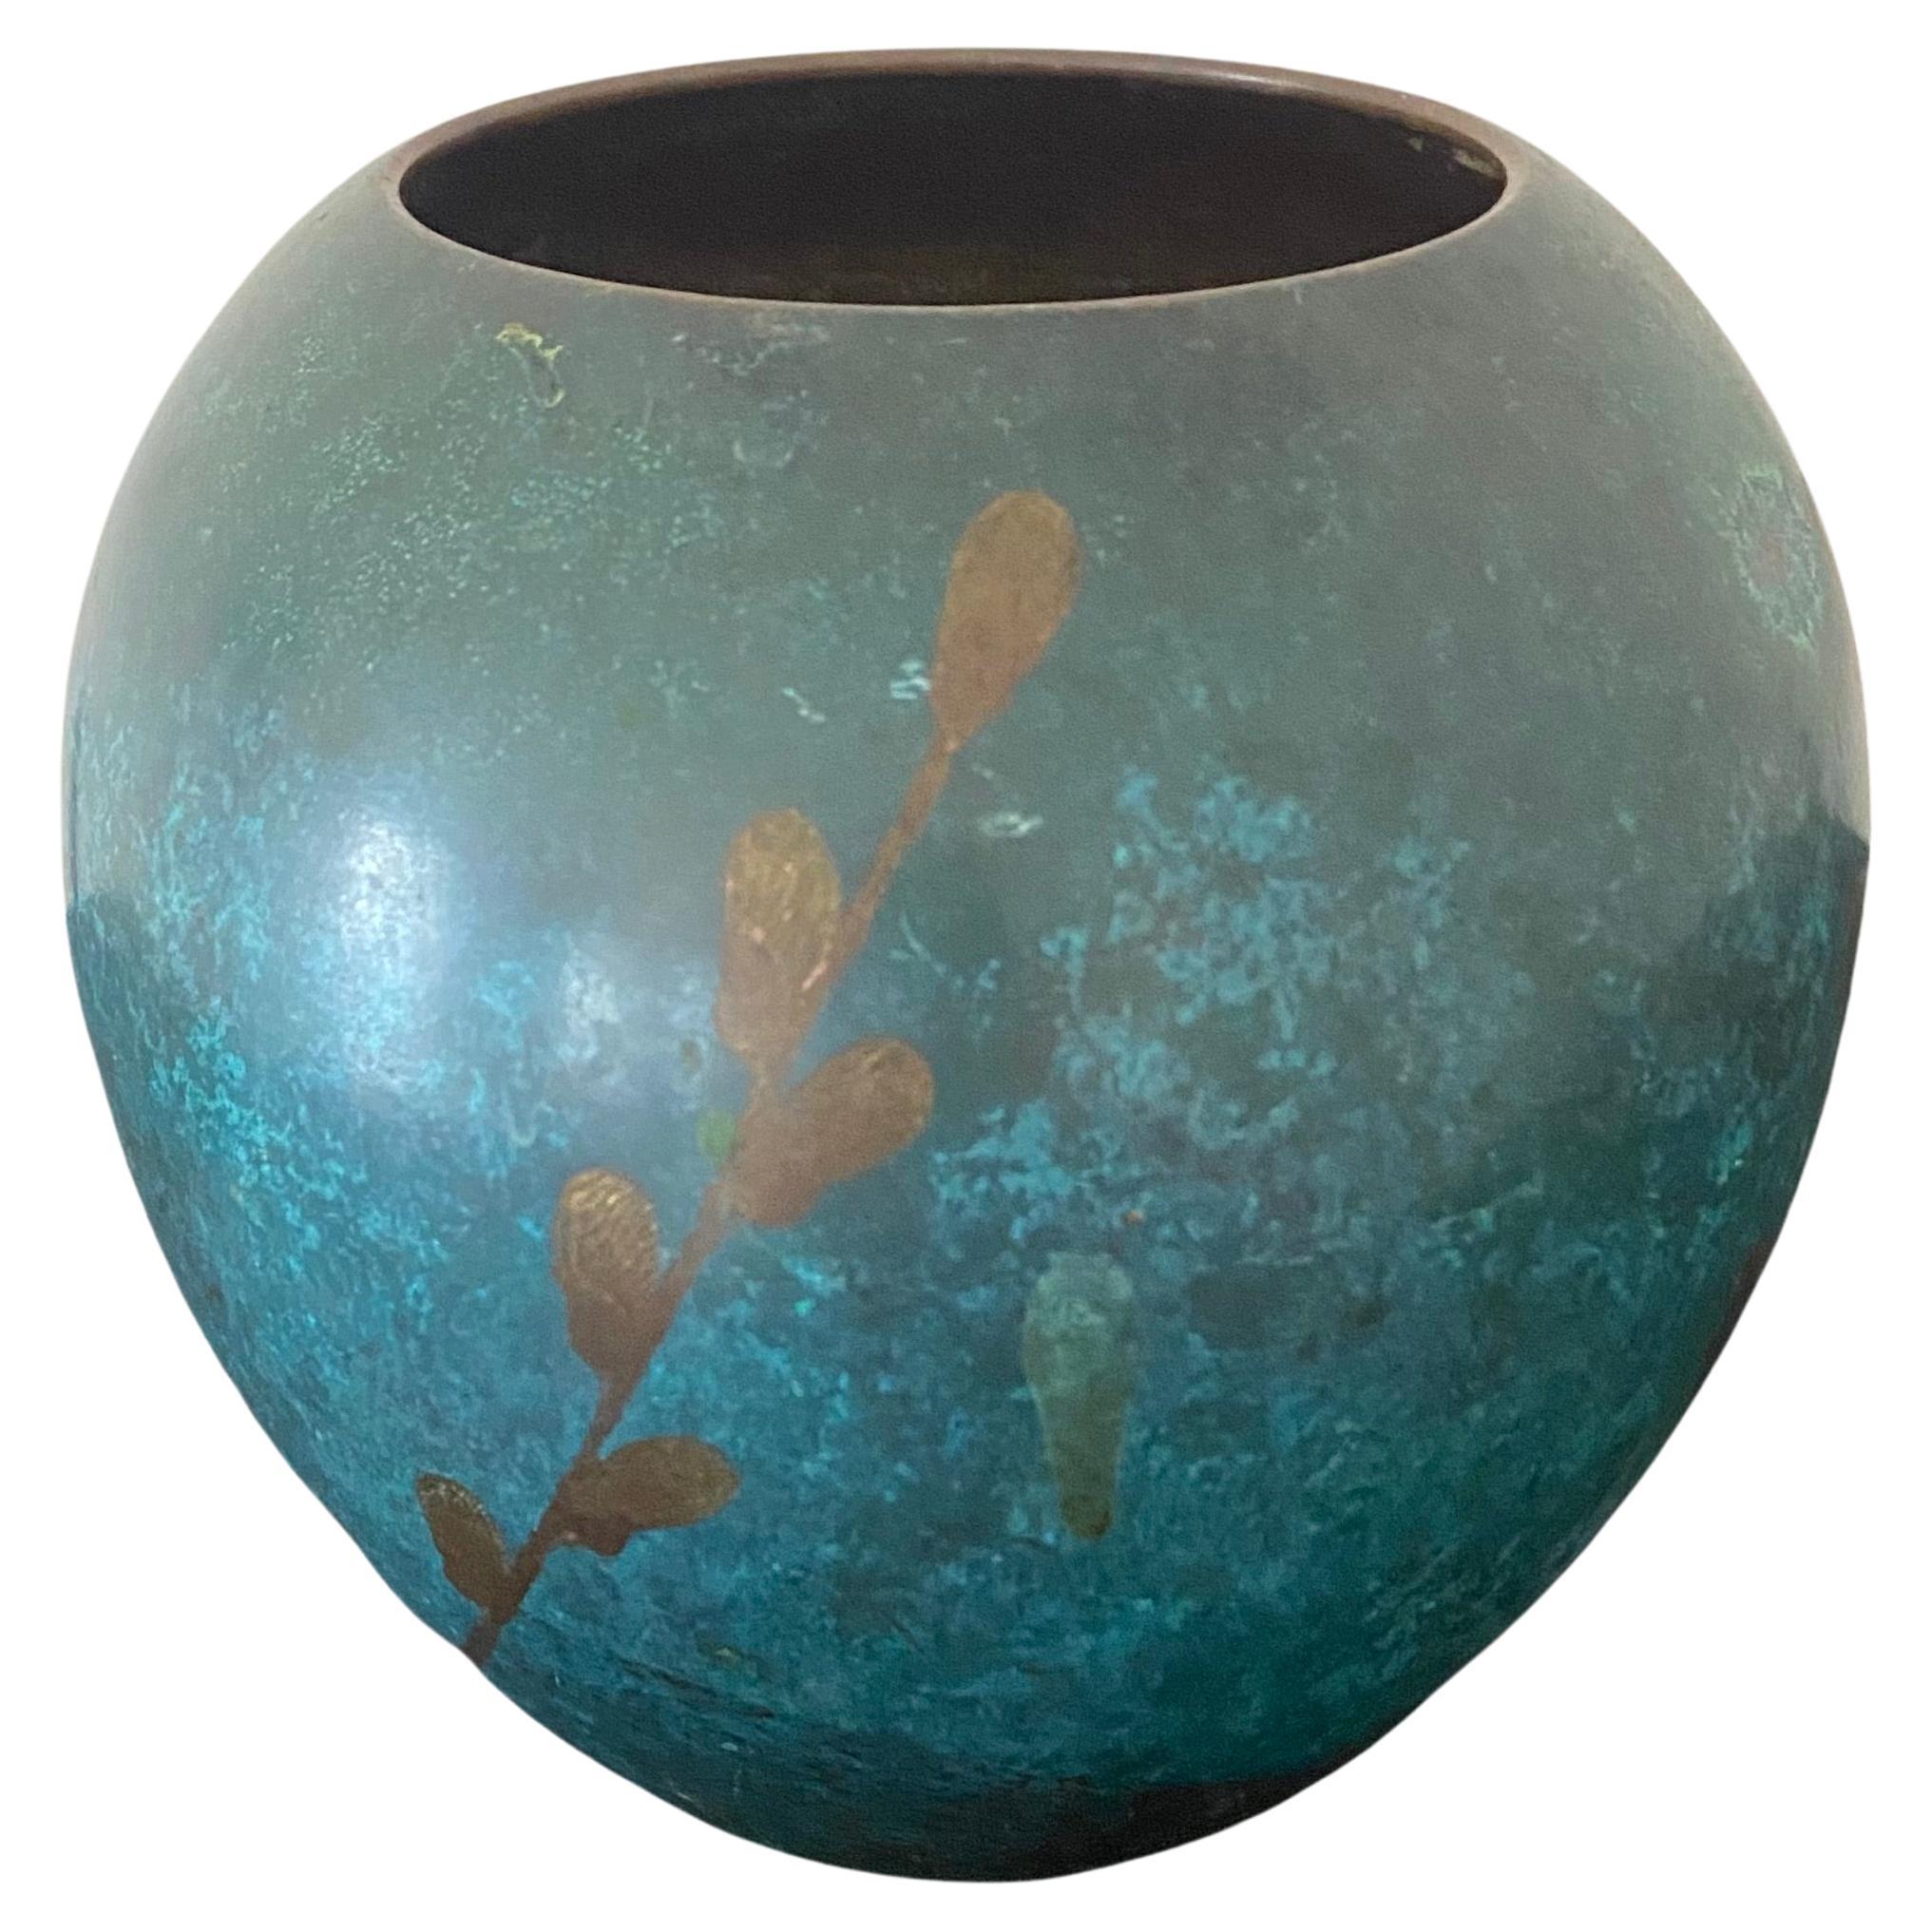 Behold this exquisite WMF (Württembergische Metallwarenfabrik) Ikora Vase, crafted from patinated bronze and featuring a stylized willow branch design by Paul Haustein (1880-1944) dating back to the 1920s. The rounded, bulbous form of the vase